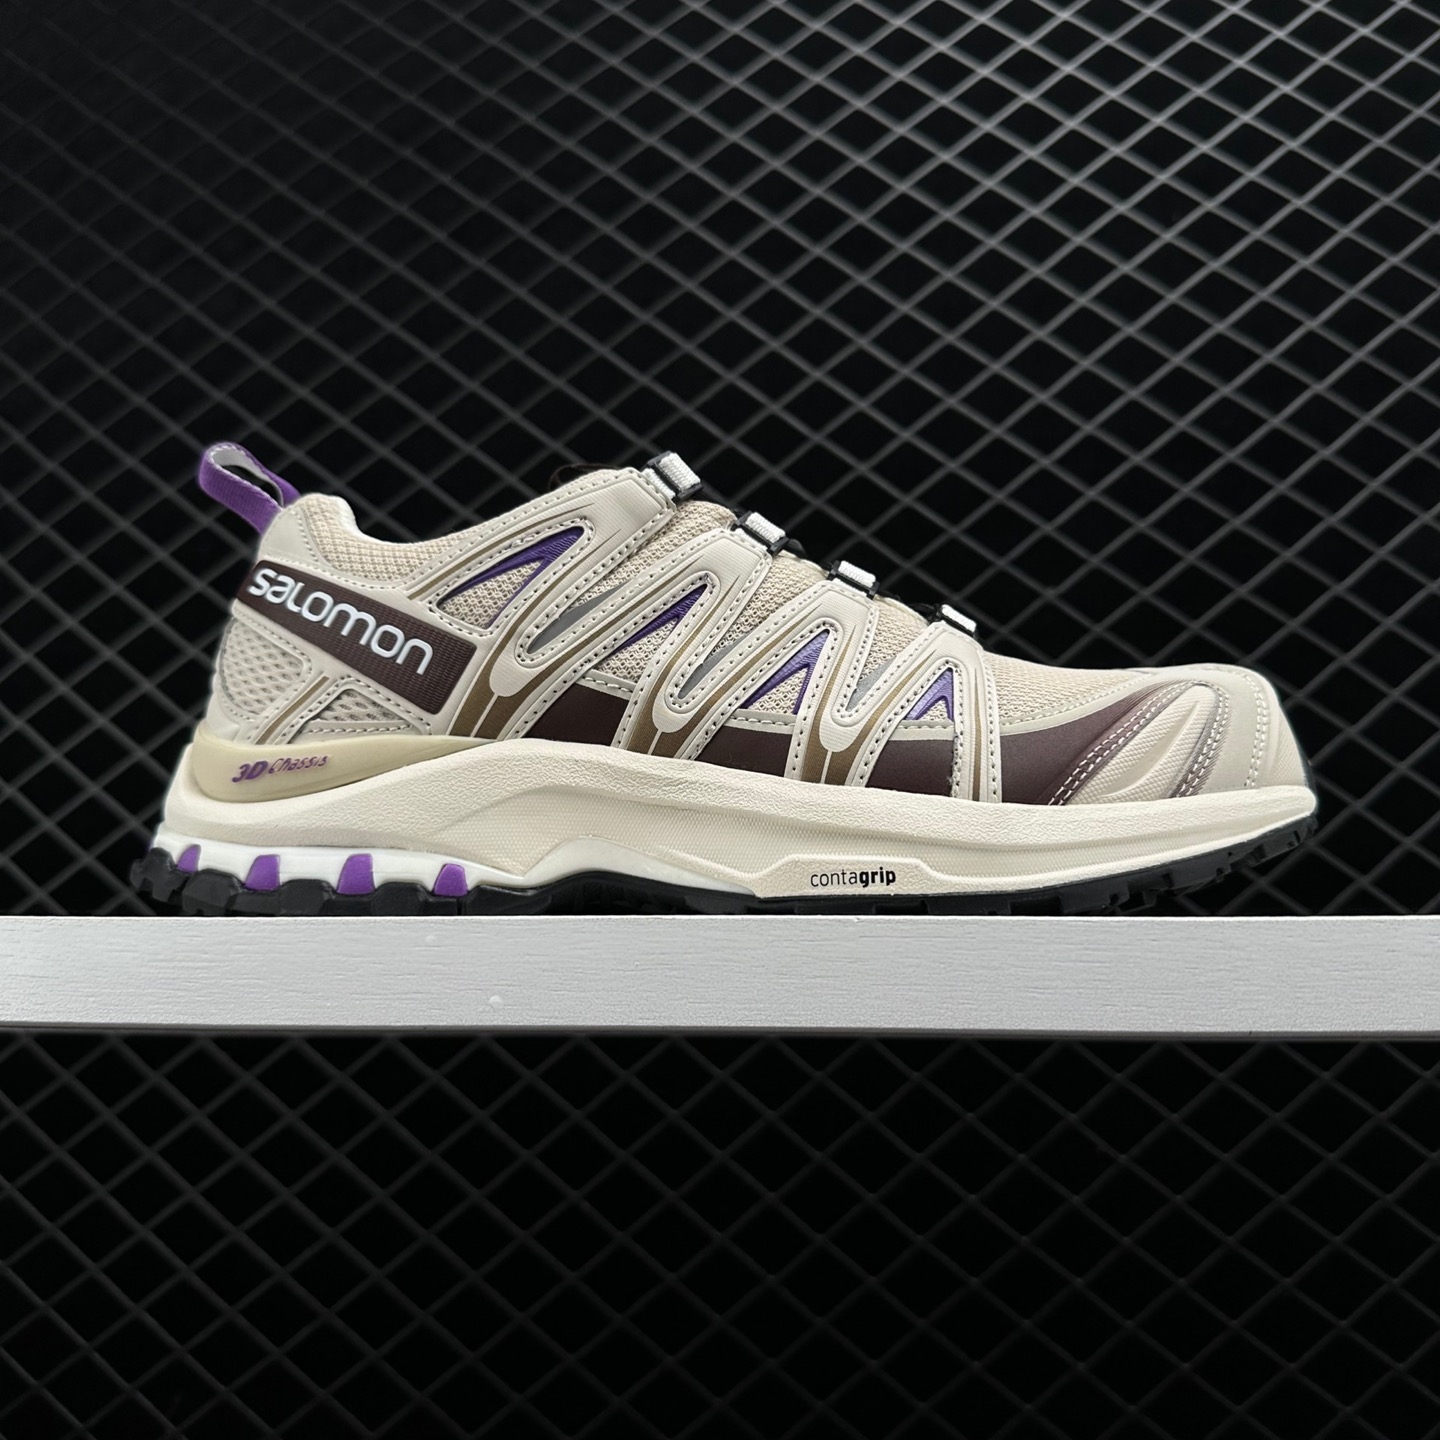 Salomon XA Pro 3D Trail Running Shoes Beige Purple 414680 - Excellent Performance and Support!